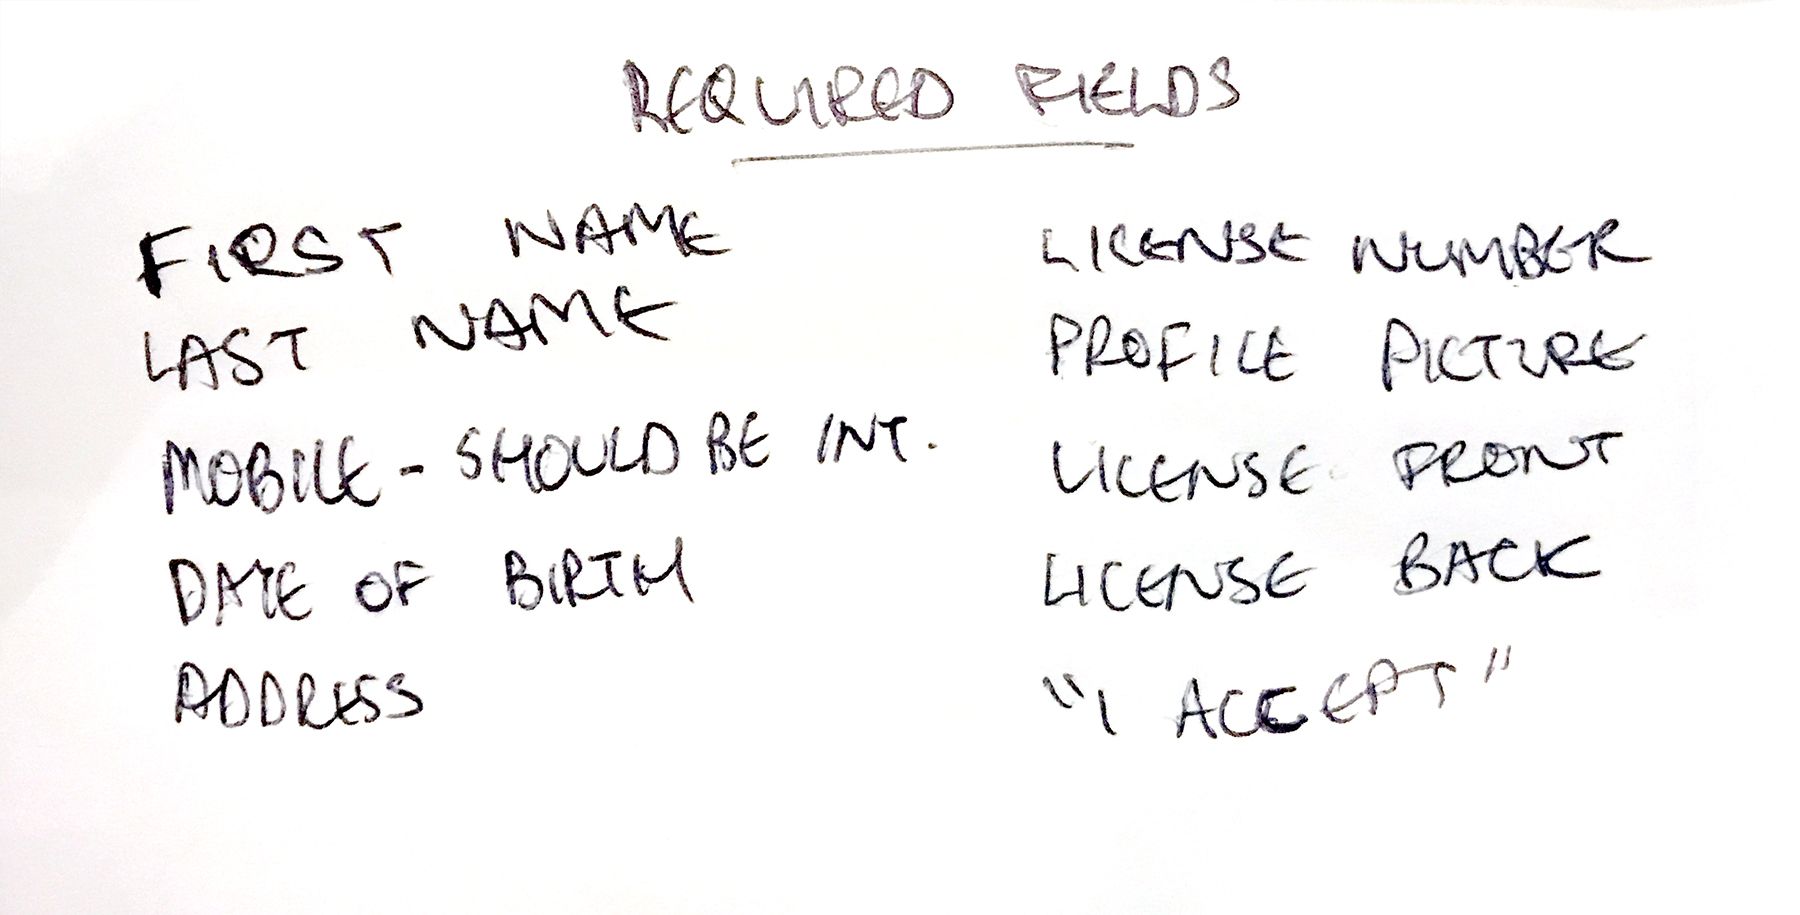 Required fields for user signup